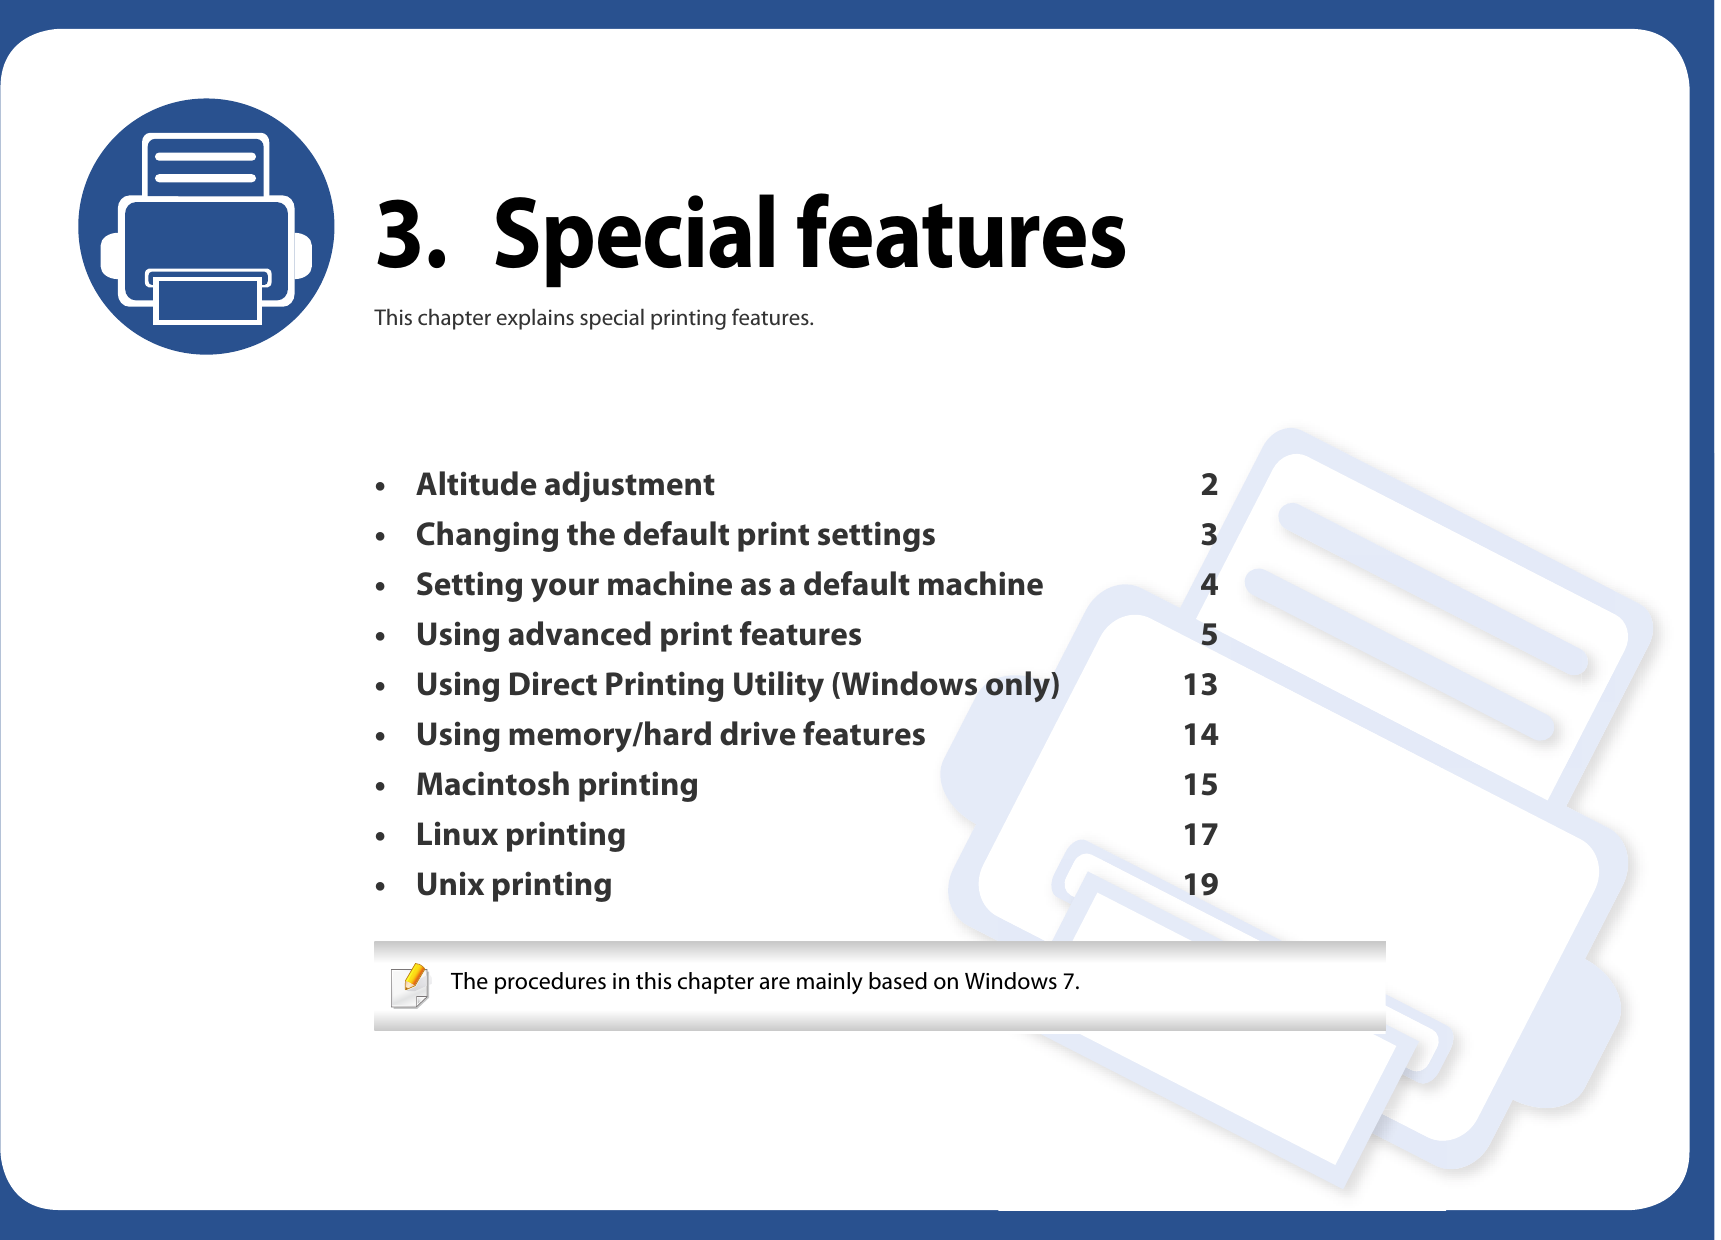 3. Special featuresThis chapter explains special printing features.• Altitude adjustment 2• Changing the default print settings 3• Setting your machine as a default machine 4• Using advanced print features 5• Using Direct Printing Utility (Windows only) 13• Using memory/hard drive features 14• Macintosh printing 15• Linux printing 17• Unix printing 19 The procedures in this chapter are mainly based on Windows 7. 